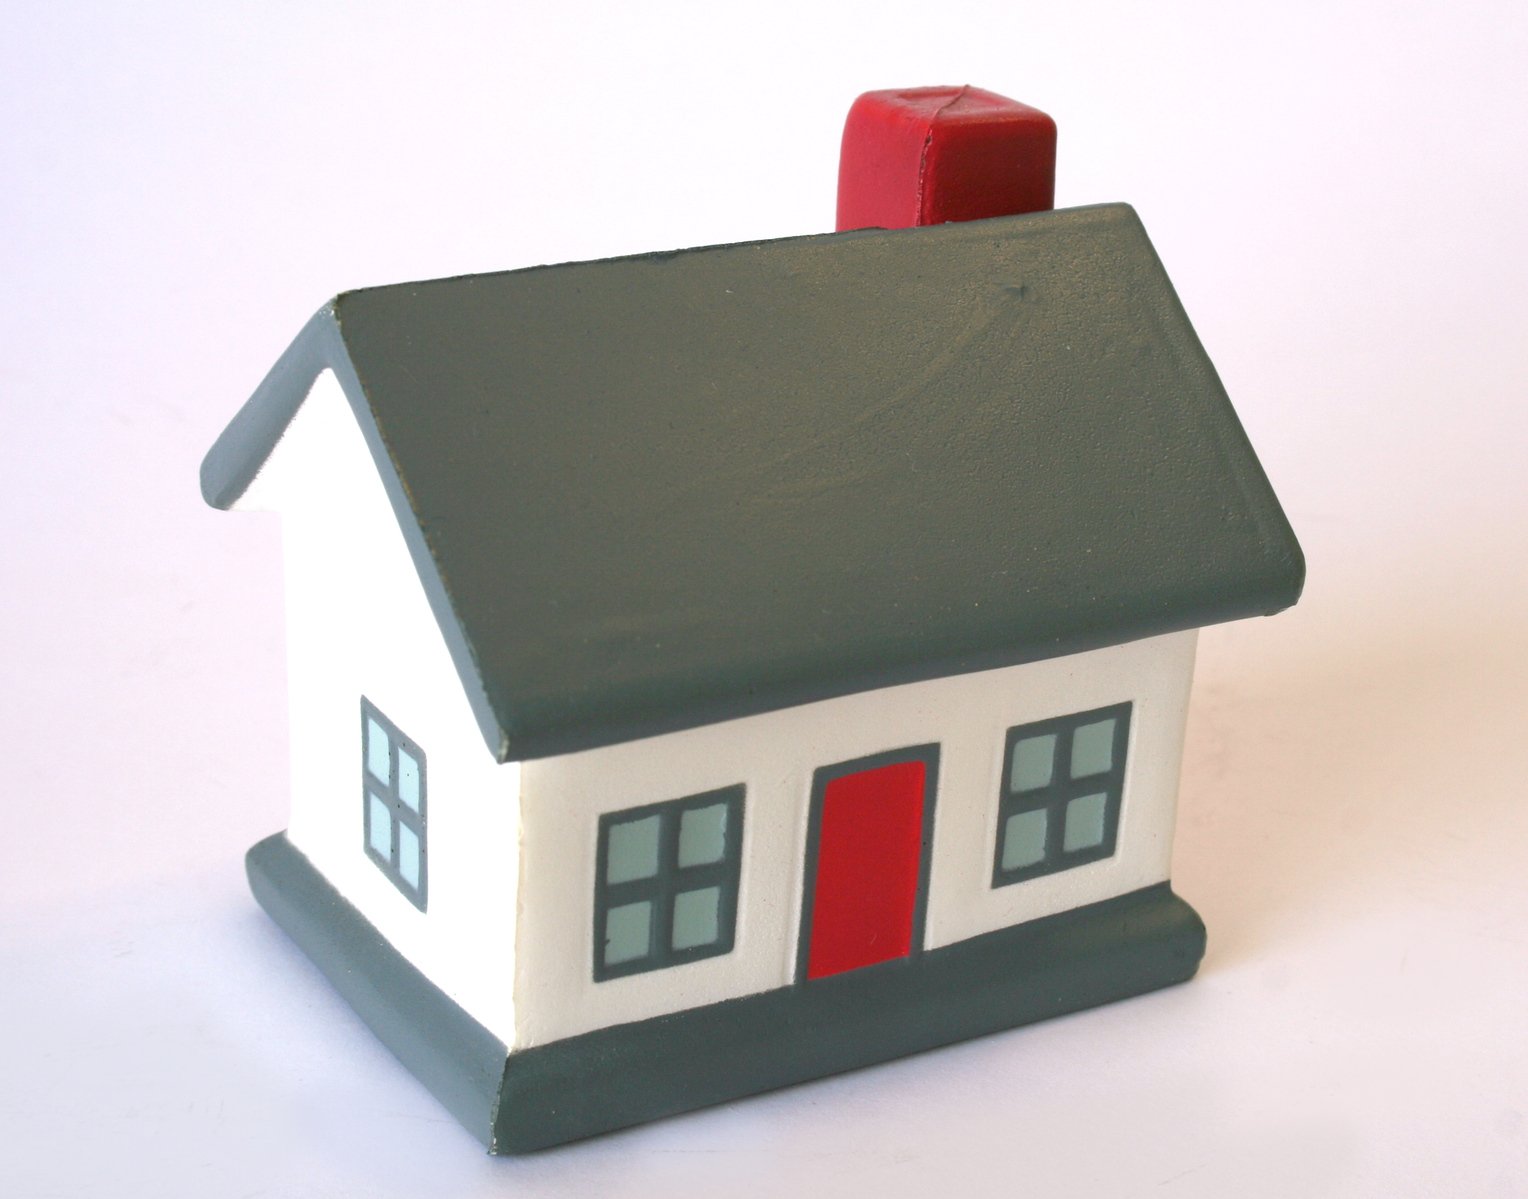 Thinking of Moving House Soon? Why Not Print One?